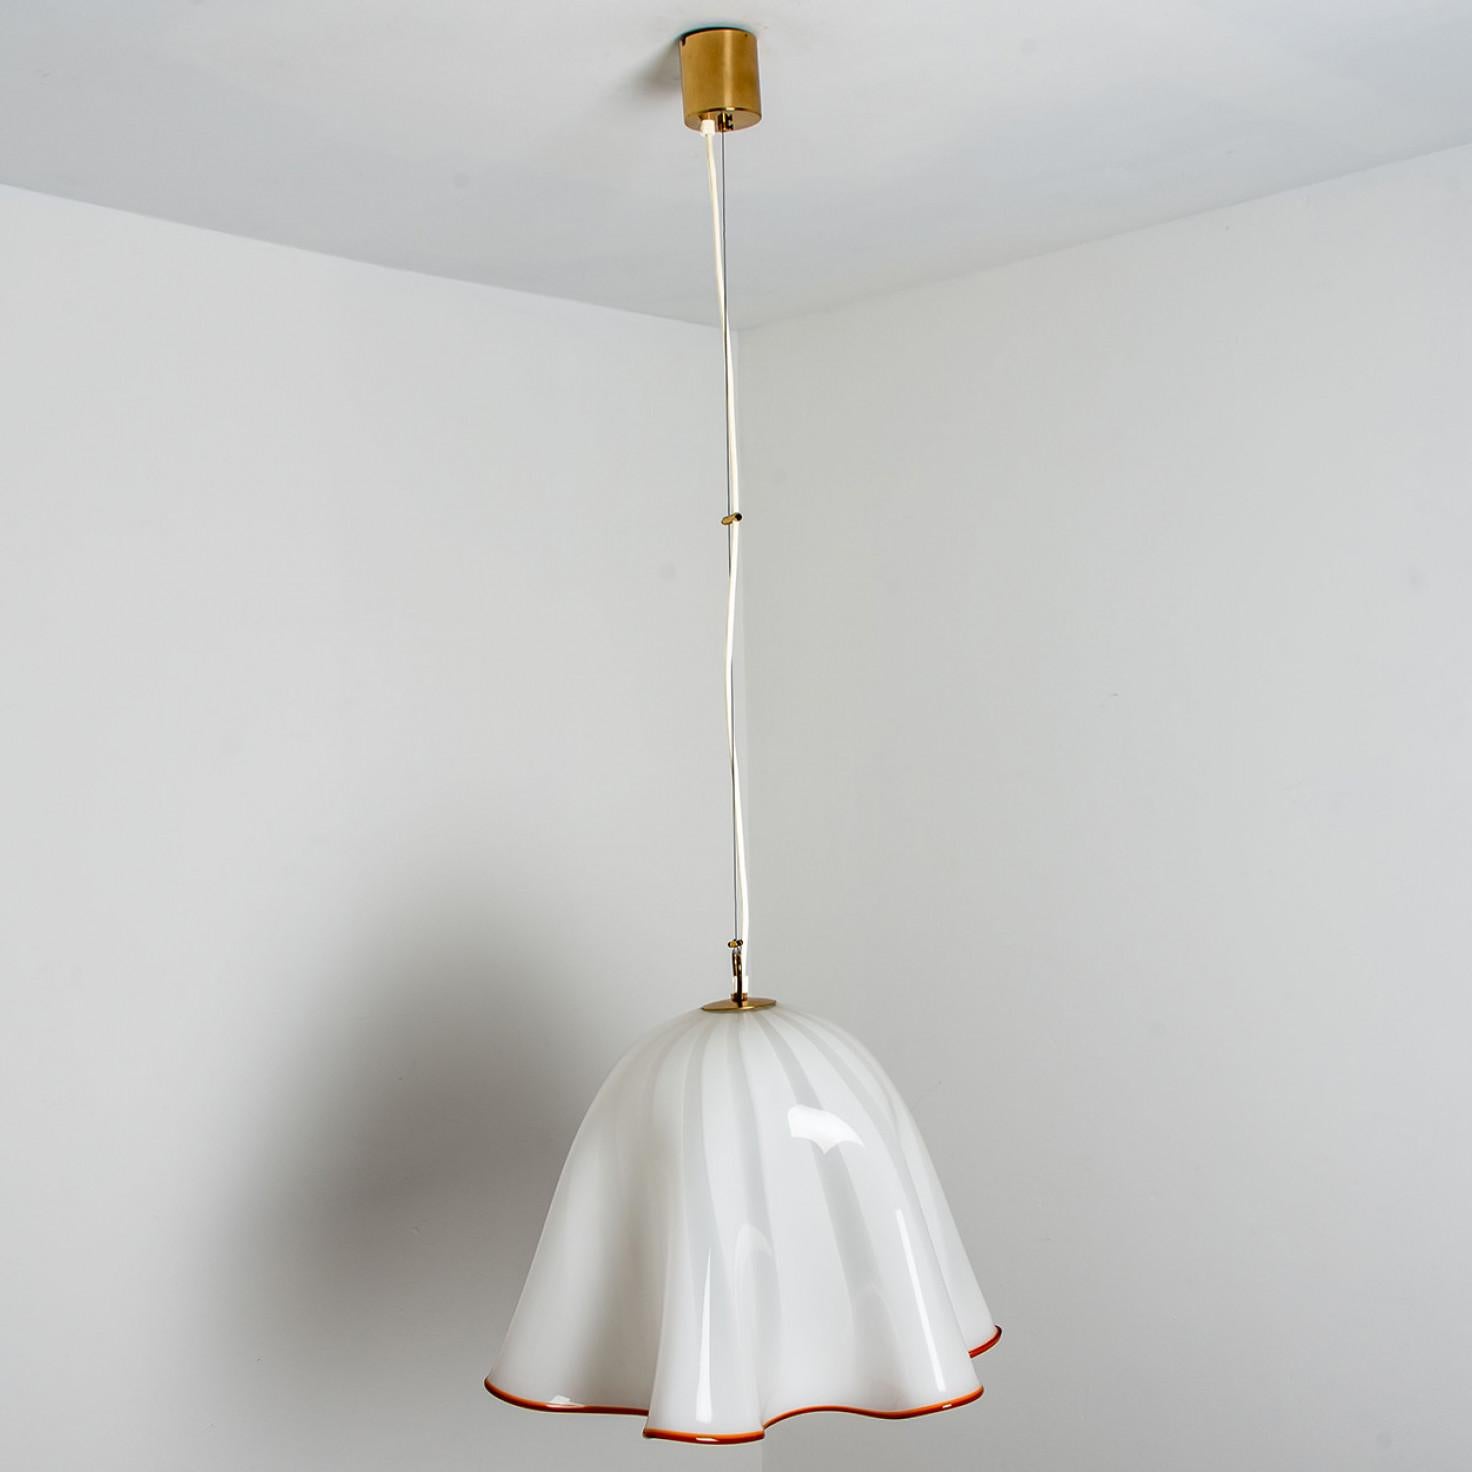 1 of the 2 Large Murano Glass Fazzoletto Pendant Light by J.T. Kalmar, 1960s For Sale 5